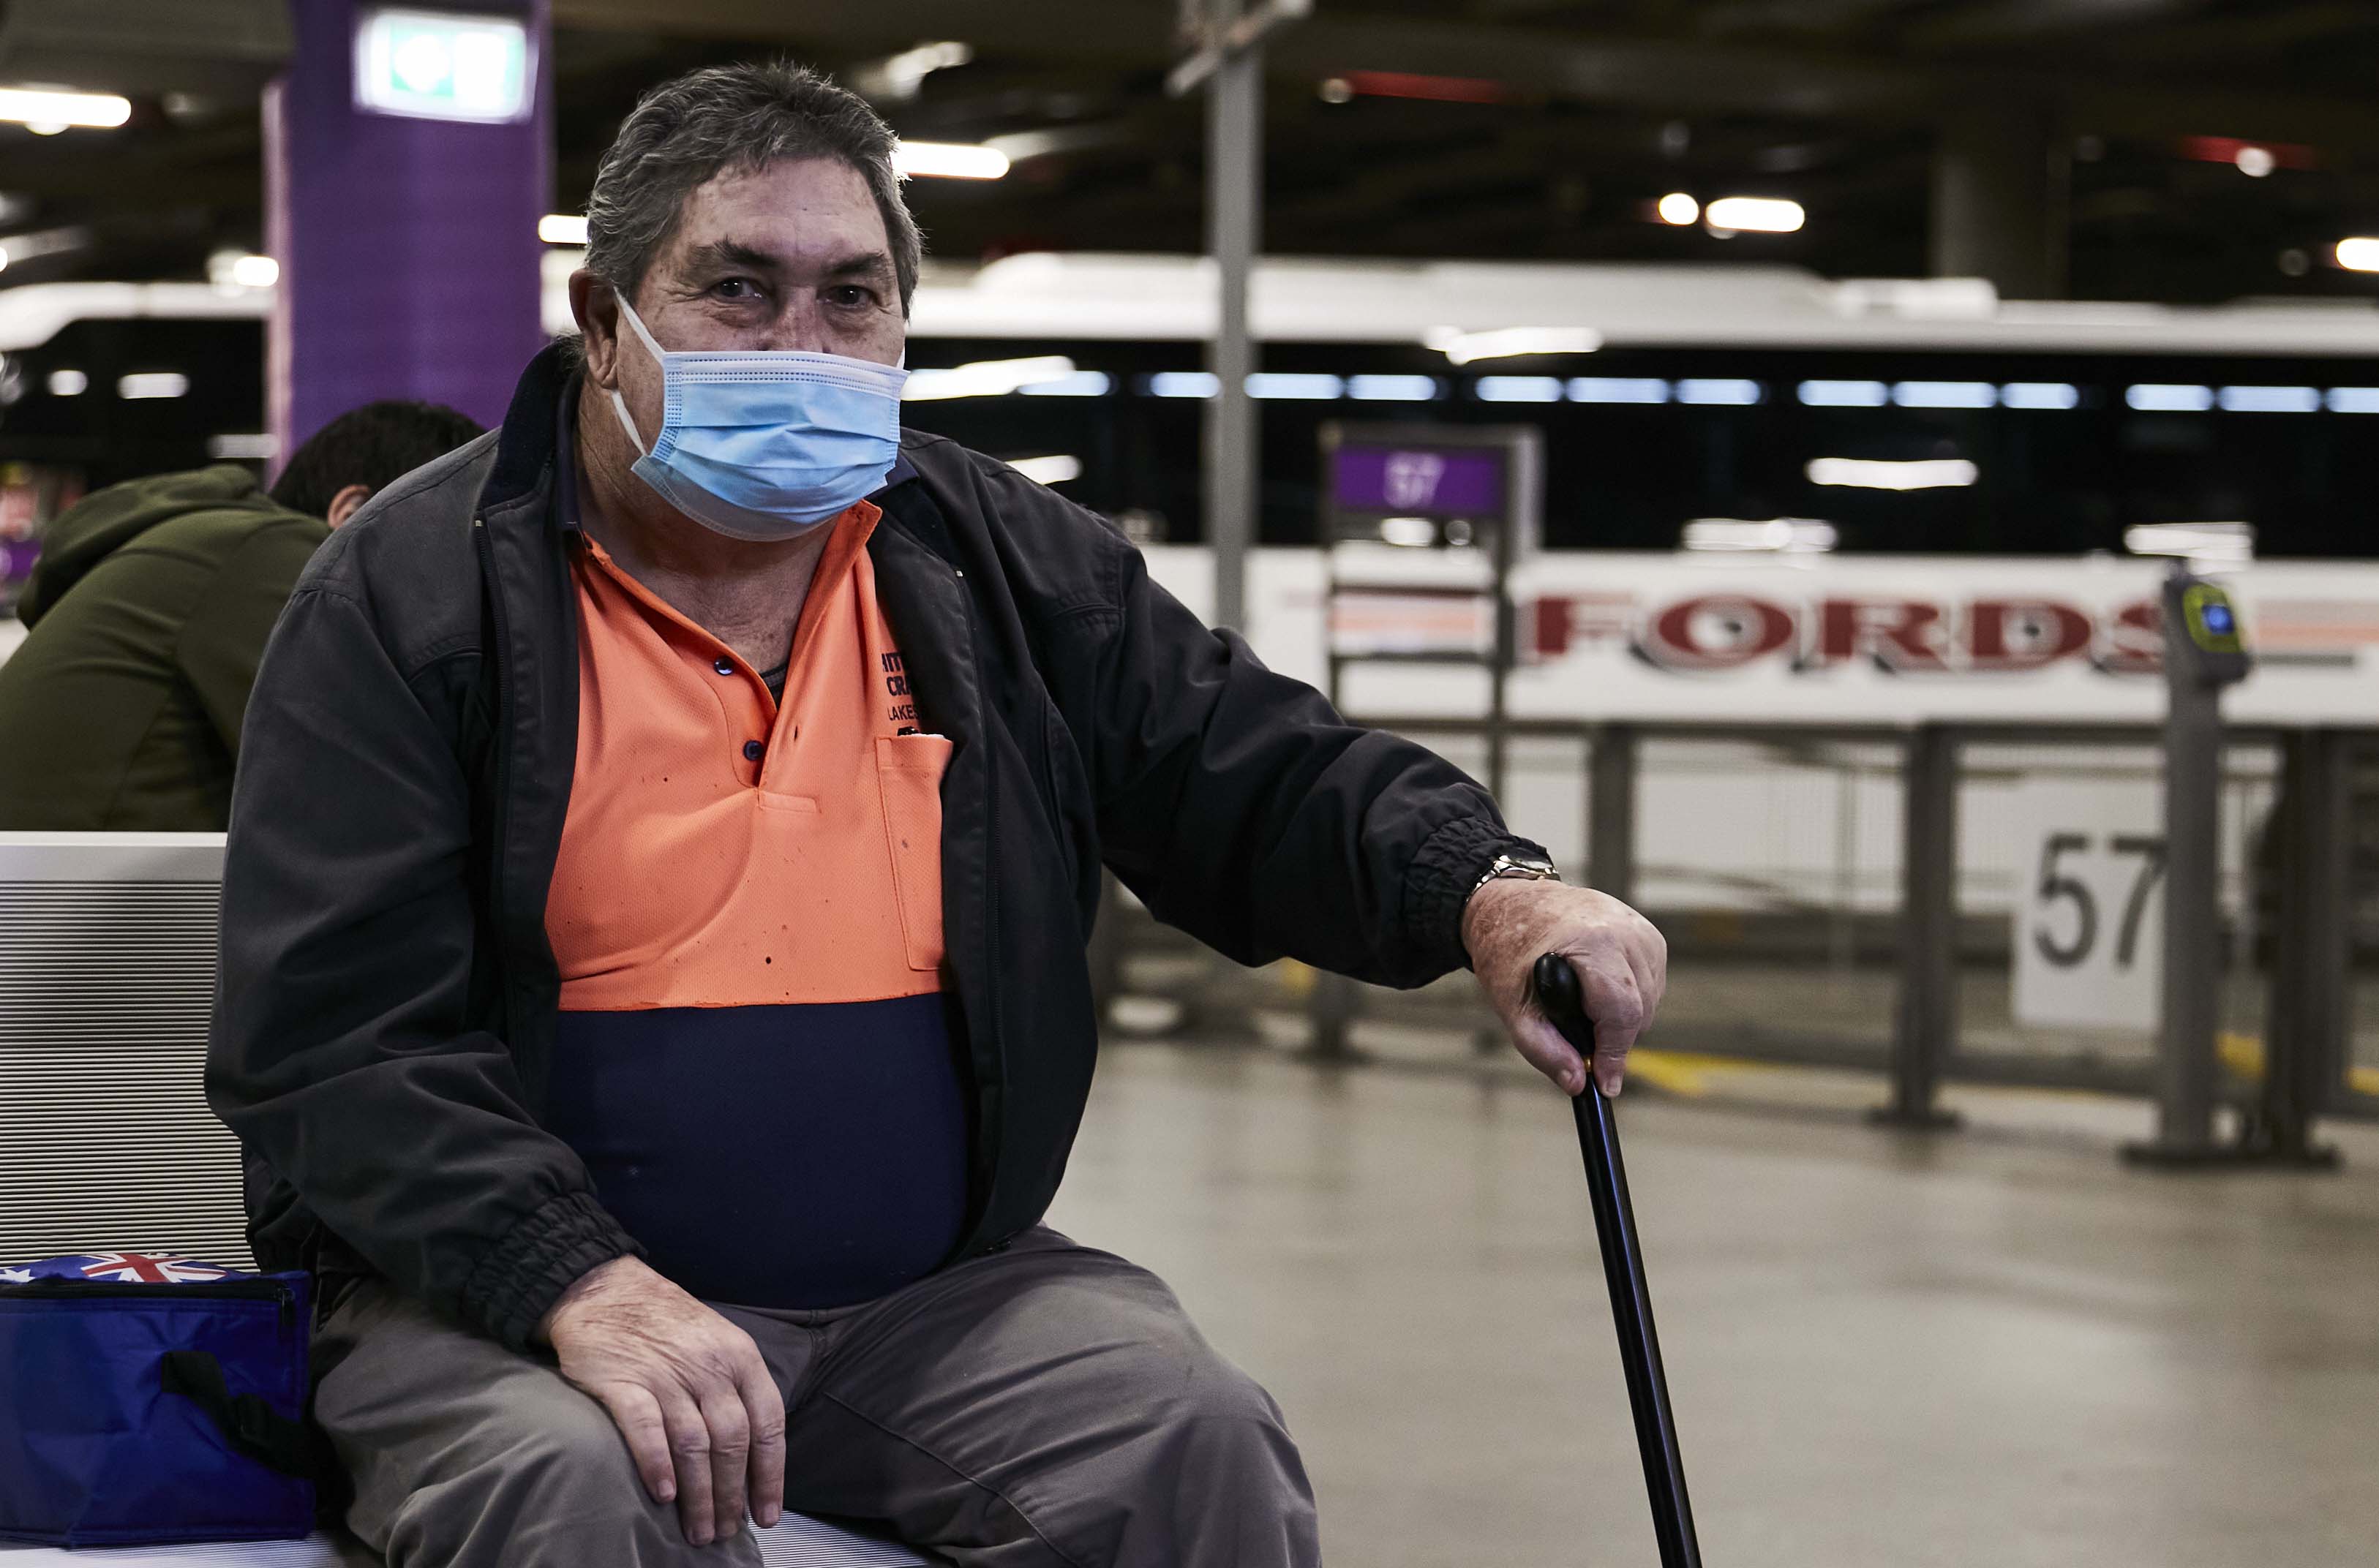 Image shows a middle-aged man sitting in a bus depot. He is wearing a face mask and a high-vis shirt. He has a walking stick in his left hand.